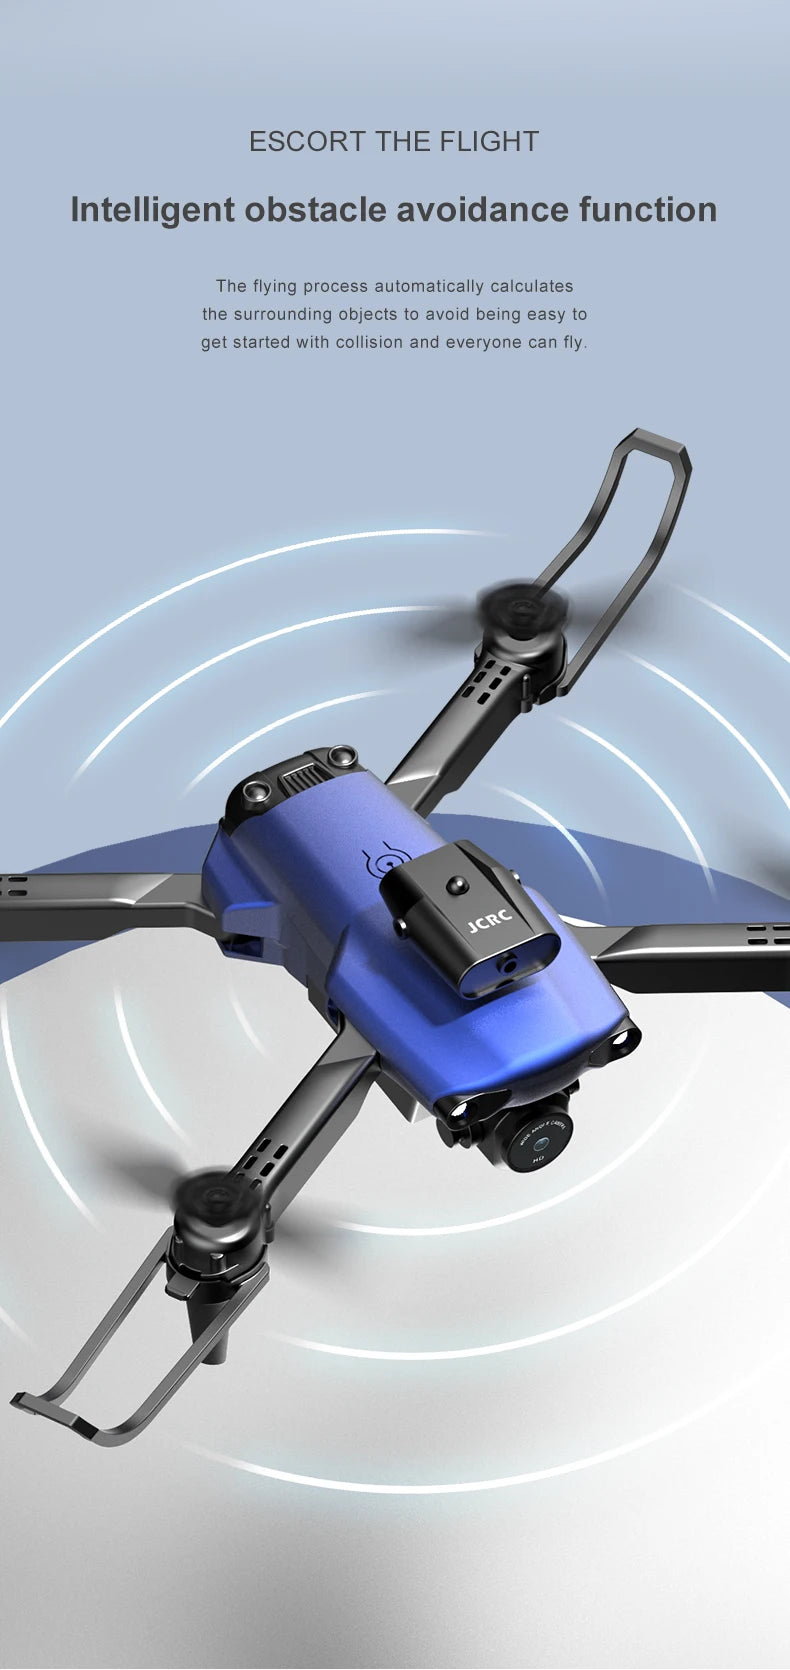 Novo 809 Drone, escort the flight intelligent obstacle avoidance function automatically calculates